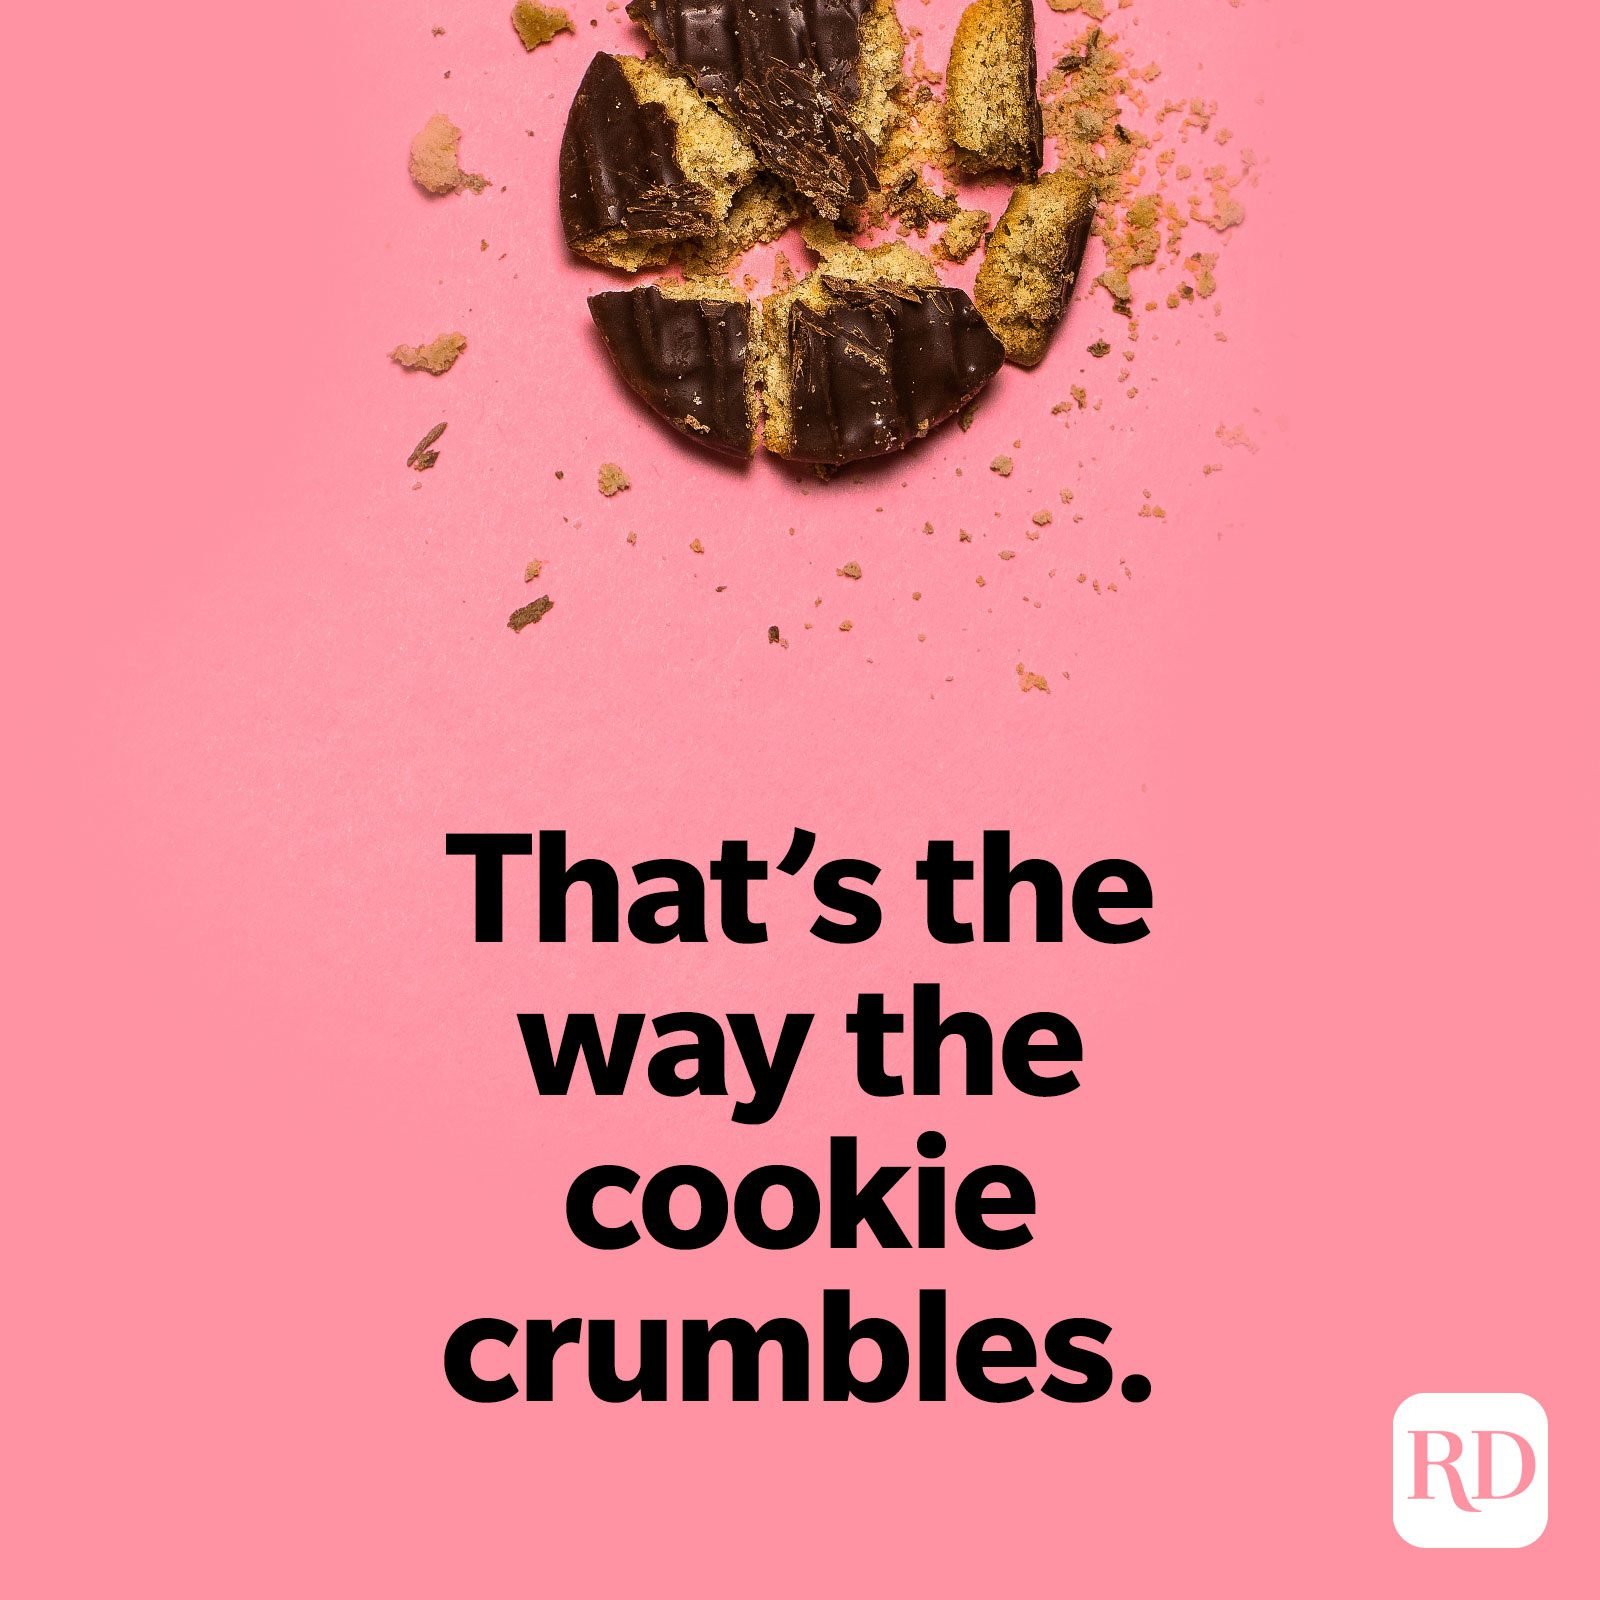 1. That's the way the cookie crumbles.